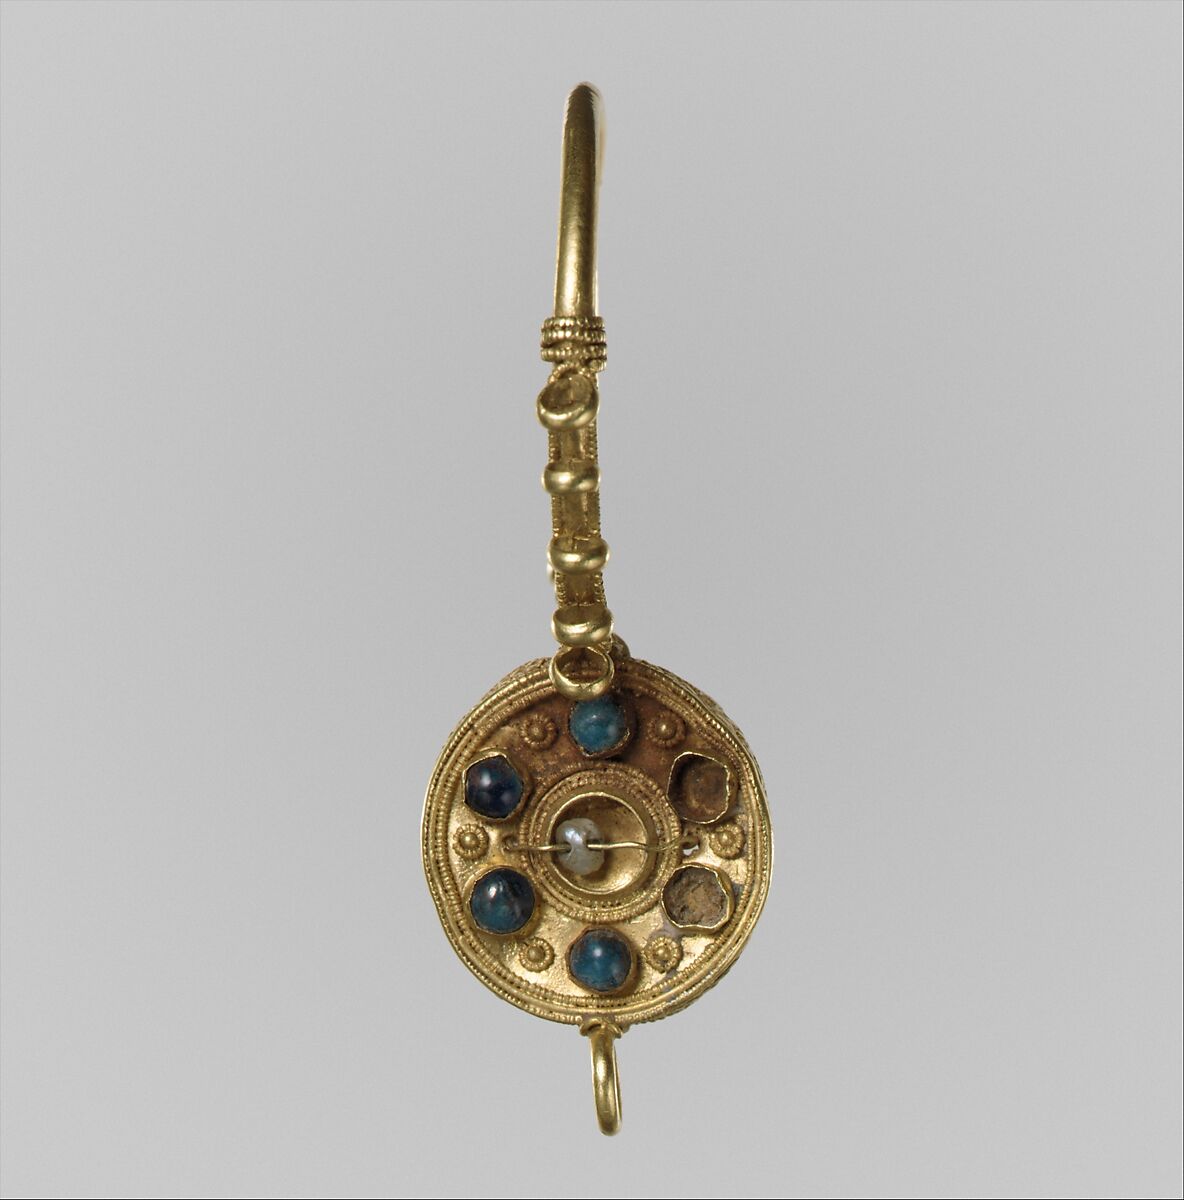 Earring, Gold, glass, and pearls., Langobardic or Byzantine (?) 